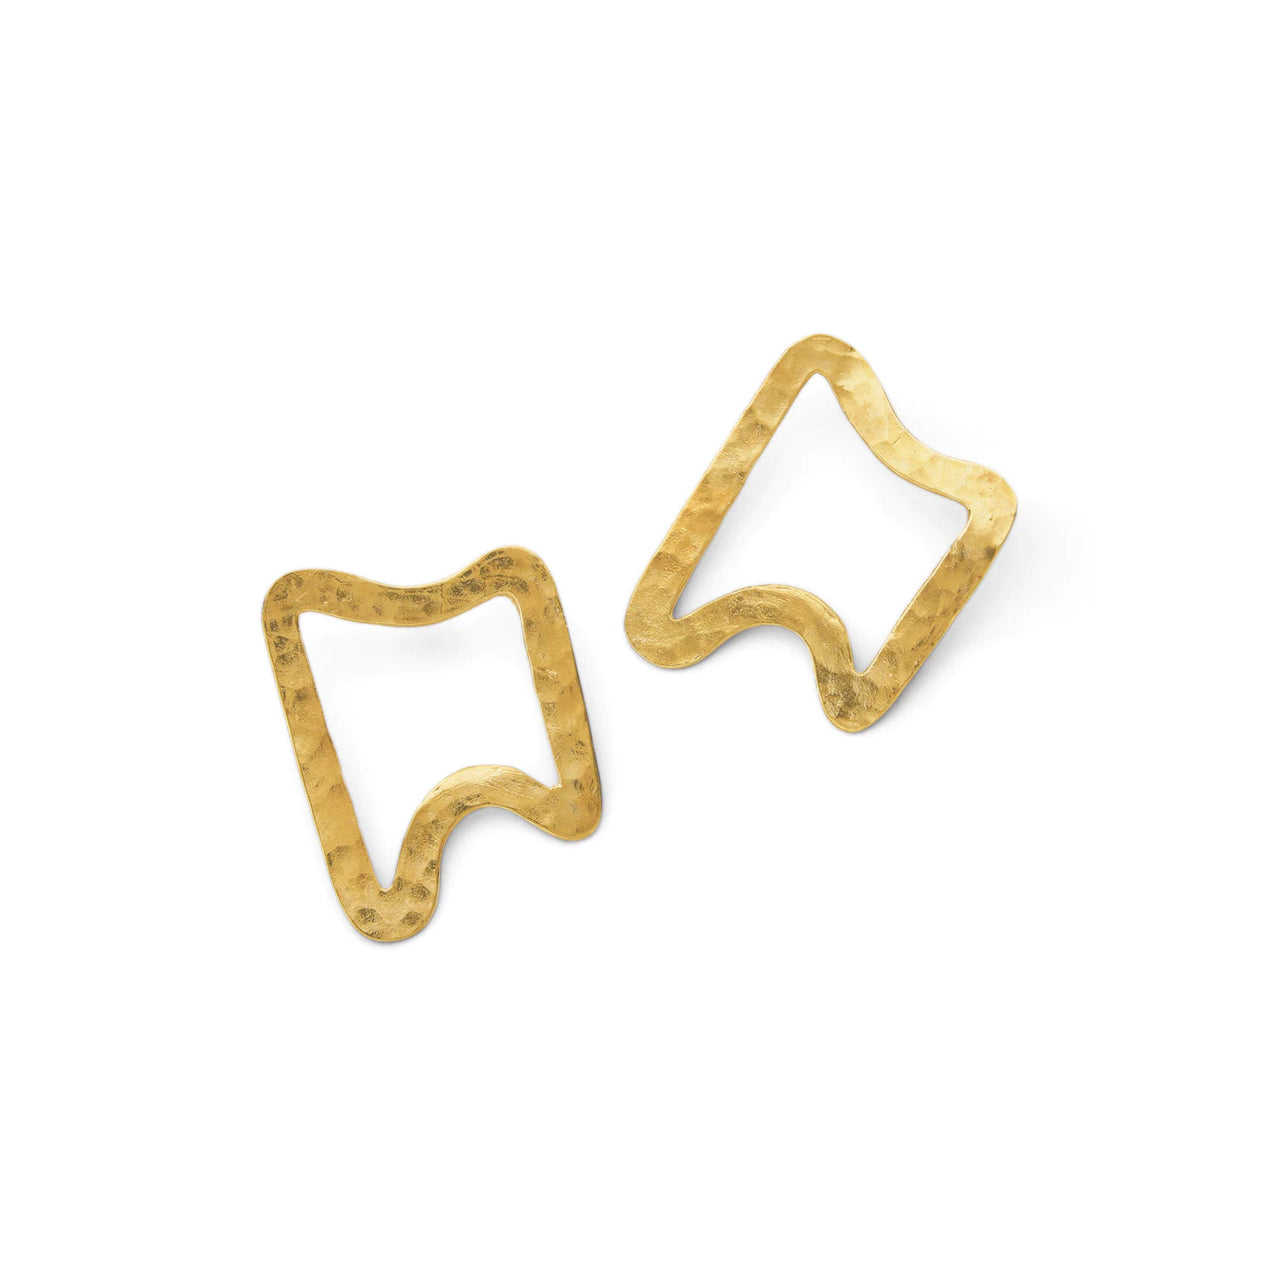 Hammered Abstract Single Earrings - vermeil